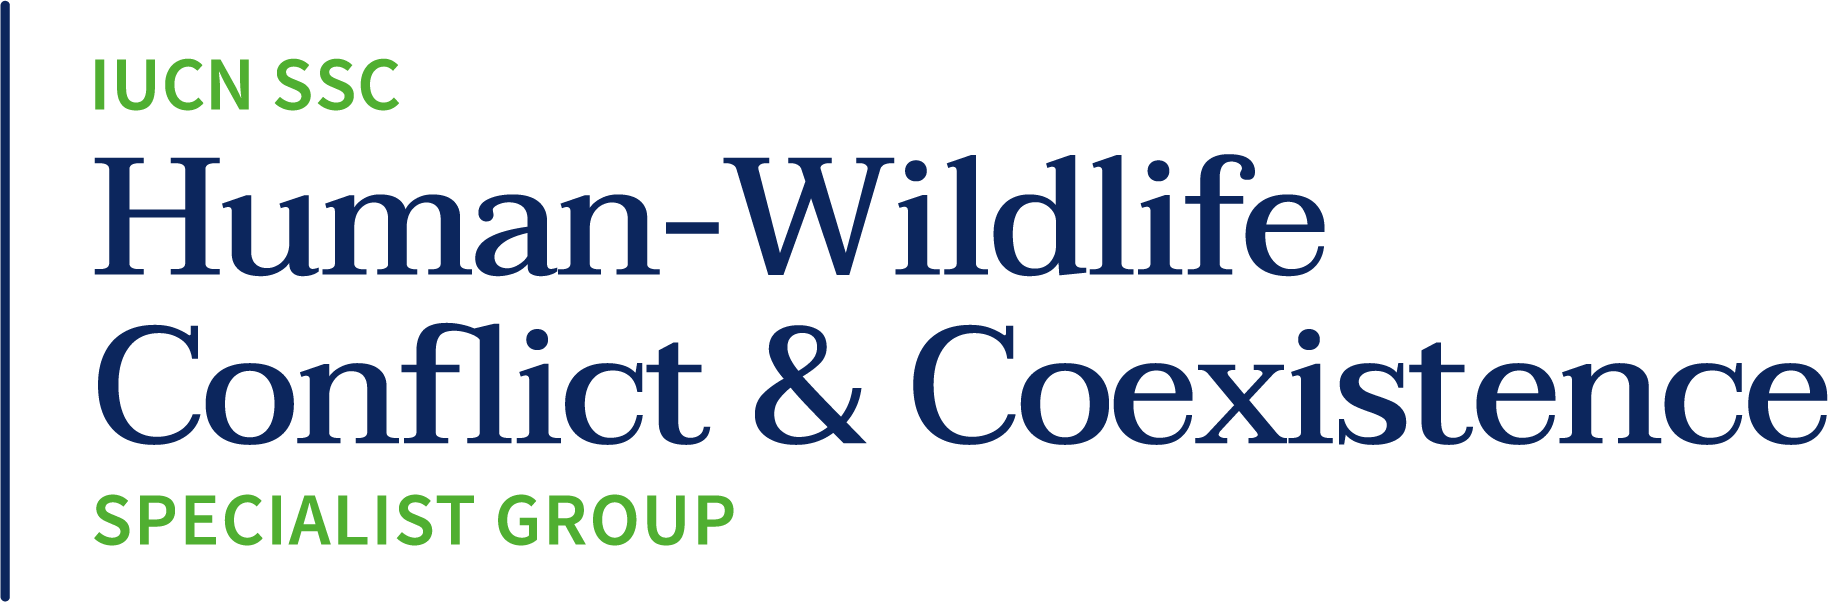 Human-Wildlife-Conflict-Logo_Specialist_Group (002)